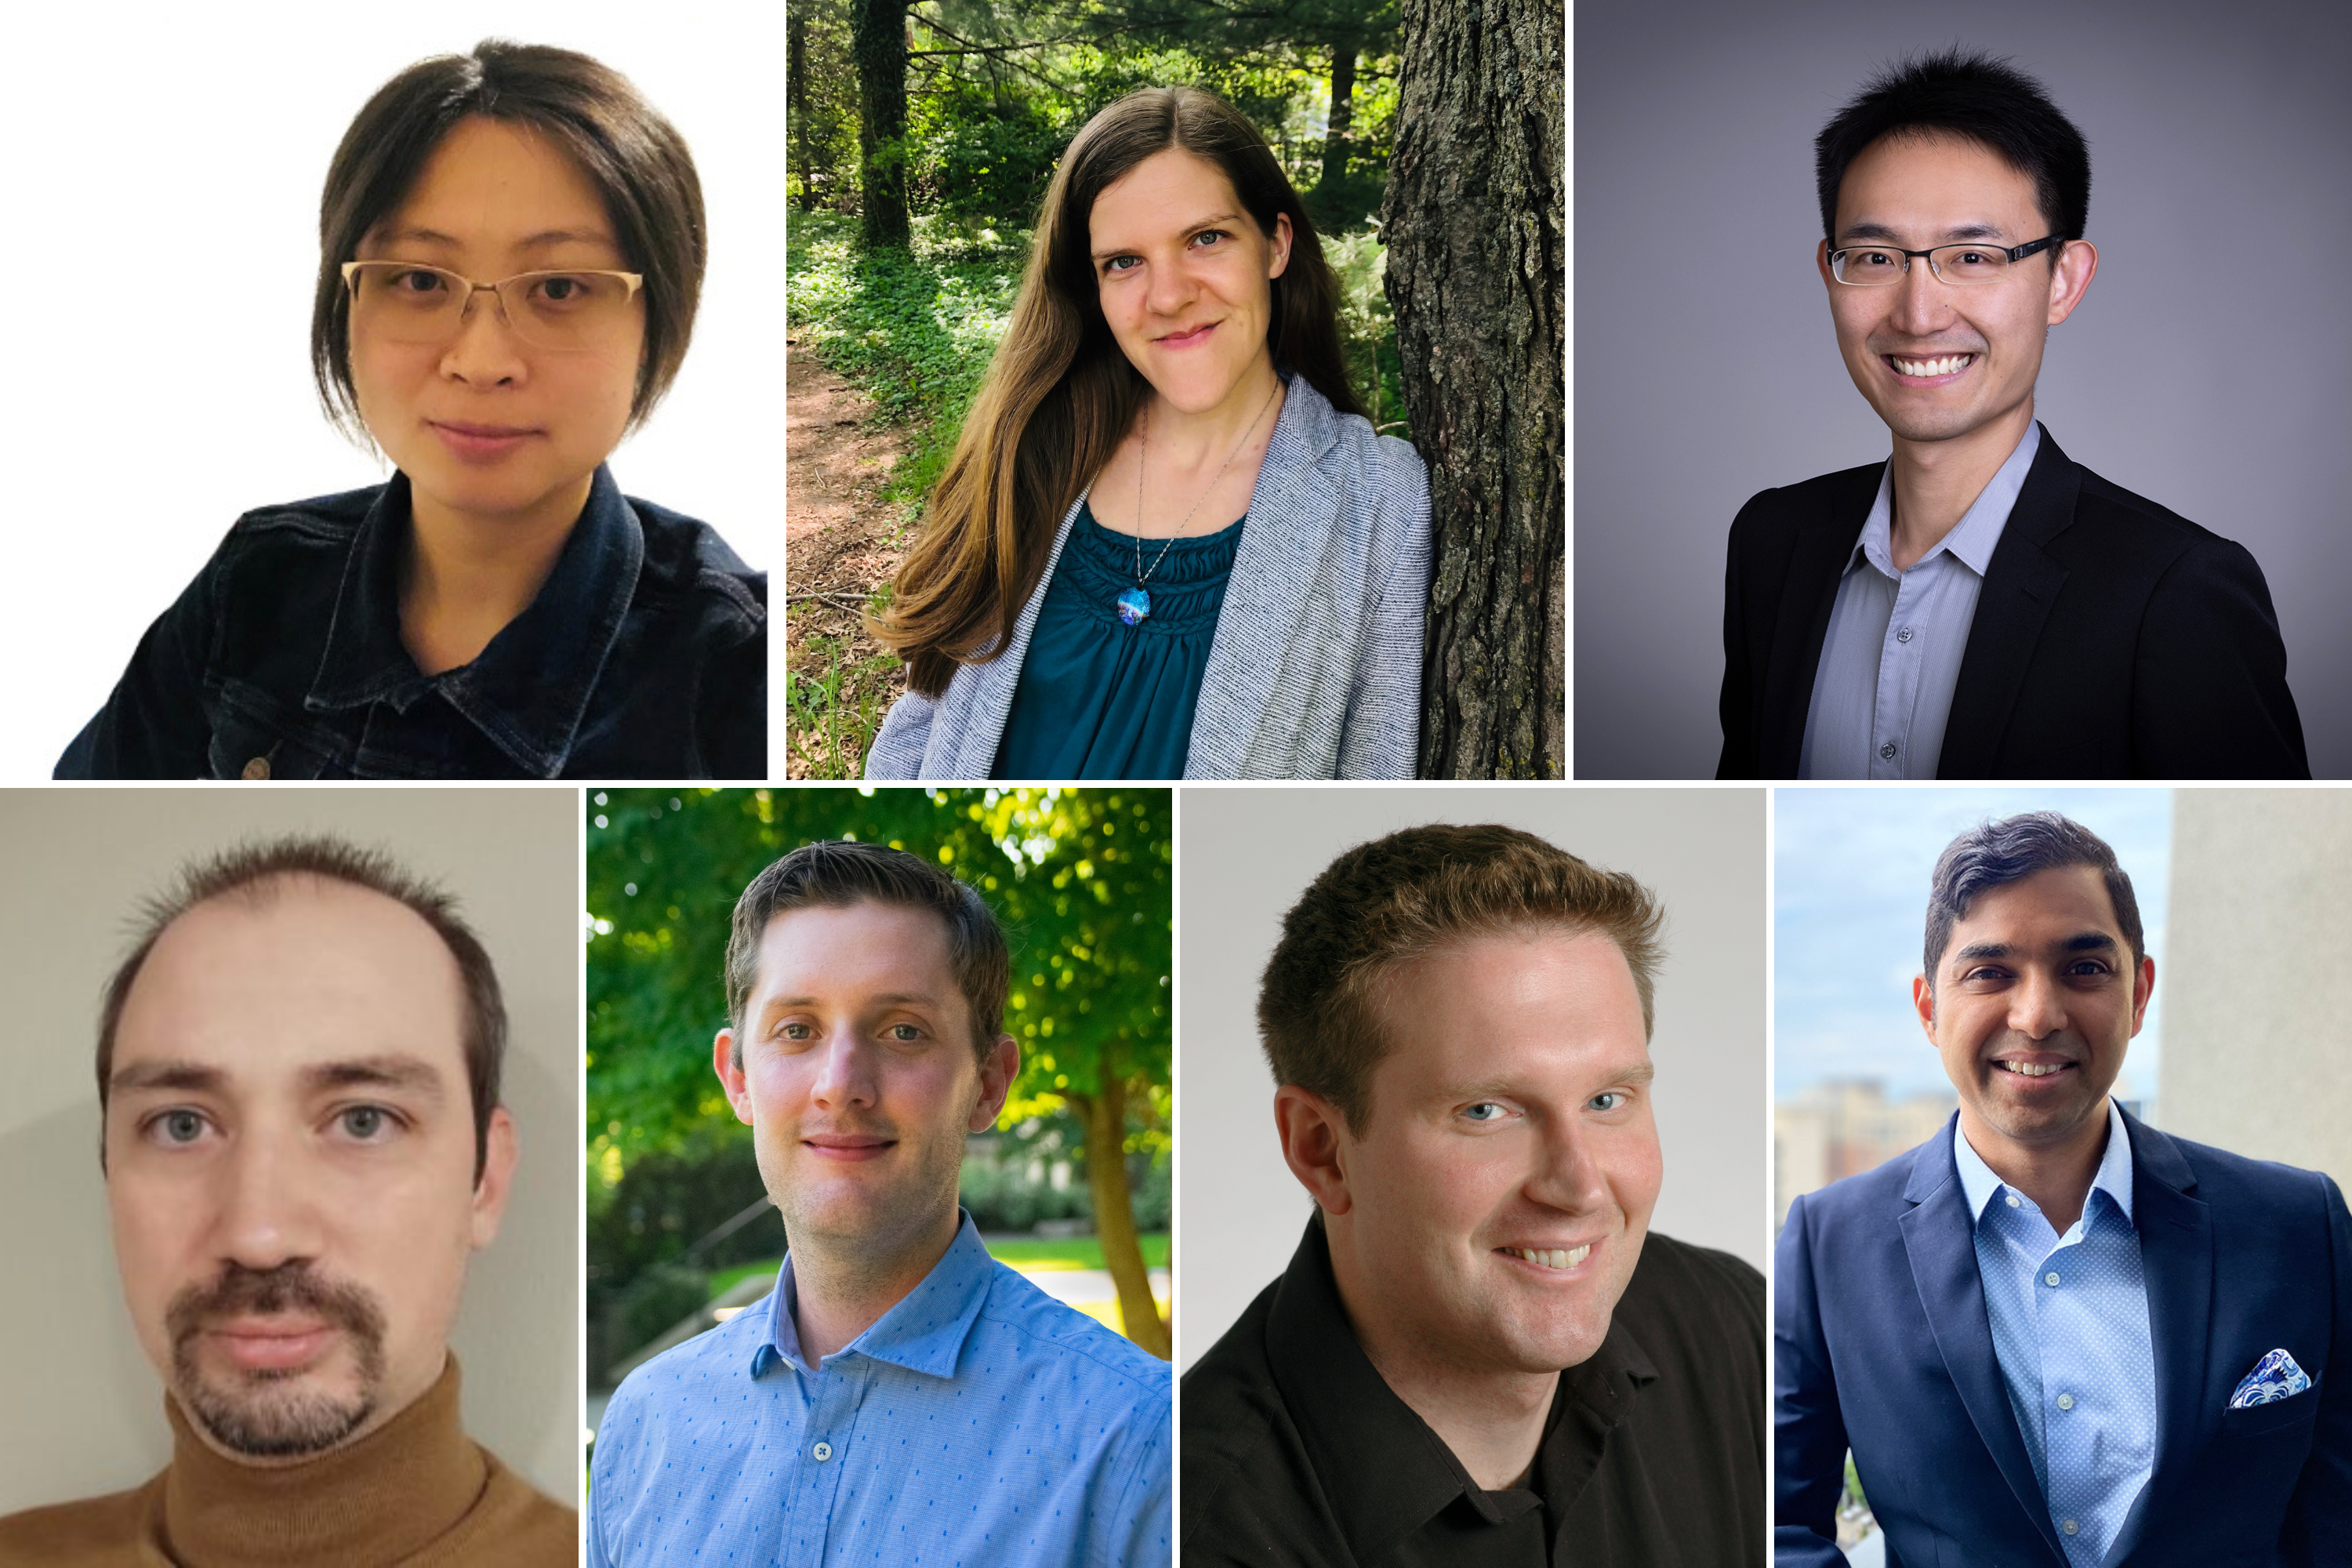 New faculty of the MIT School of Science (clockwise from top left): Wanying Kang, Sarah Millholland, Sam Peng, Harikesh Wong, Martin Wainwright, Richard Teague, and Julien Tailleur.